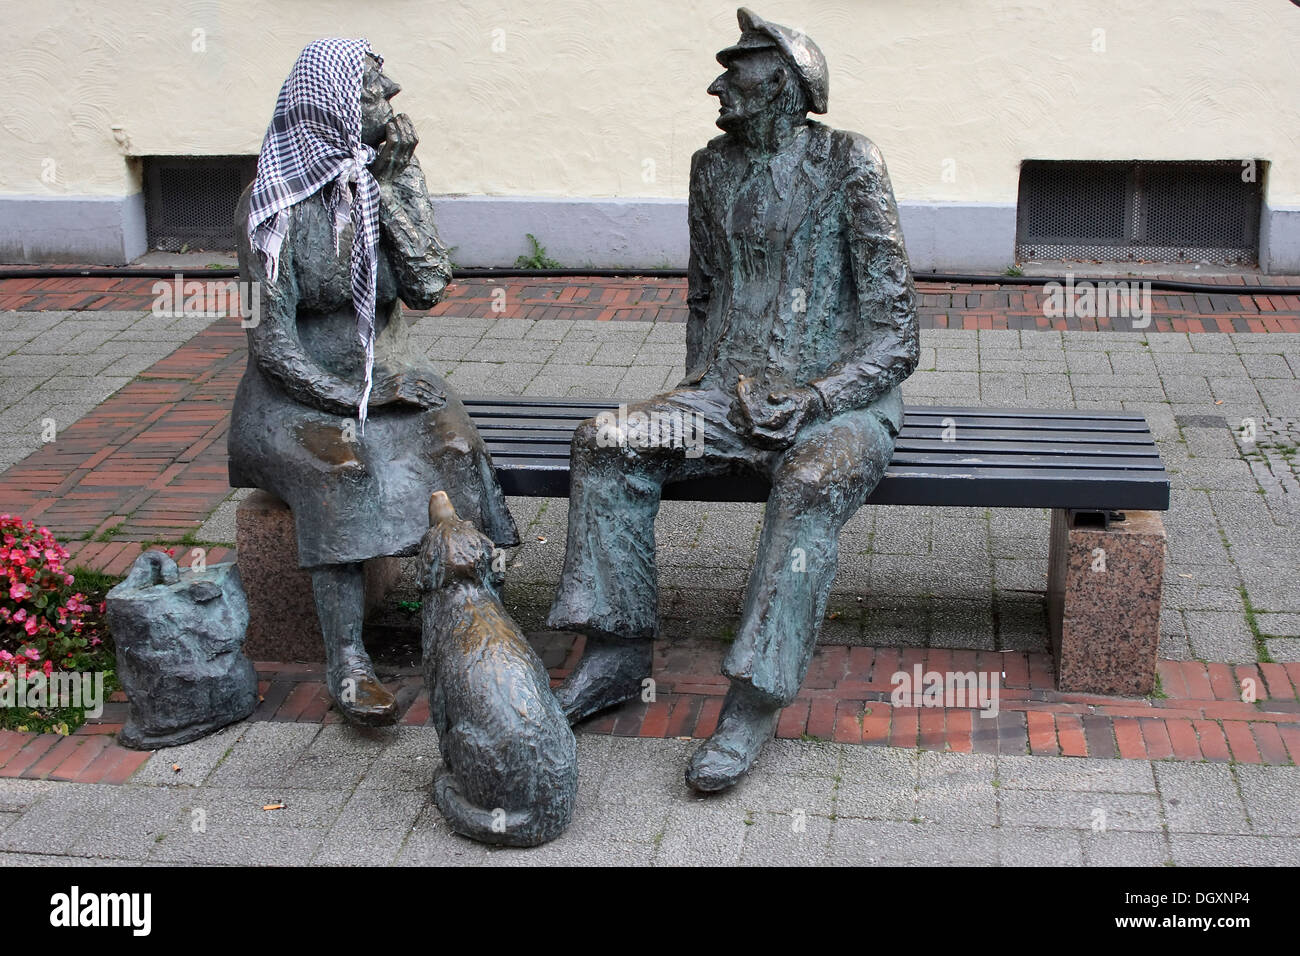 Sculptures on a bench, man and woman in a pedestrian zone in Aurich, East Frisia, Lower Saxony Stock Photo